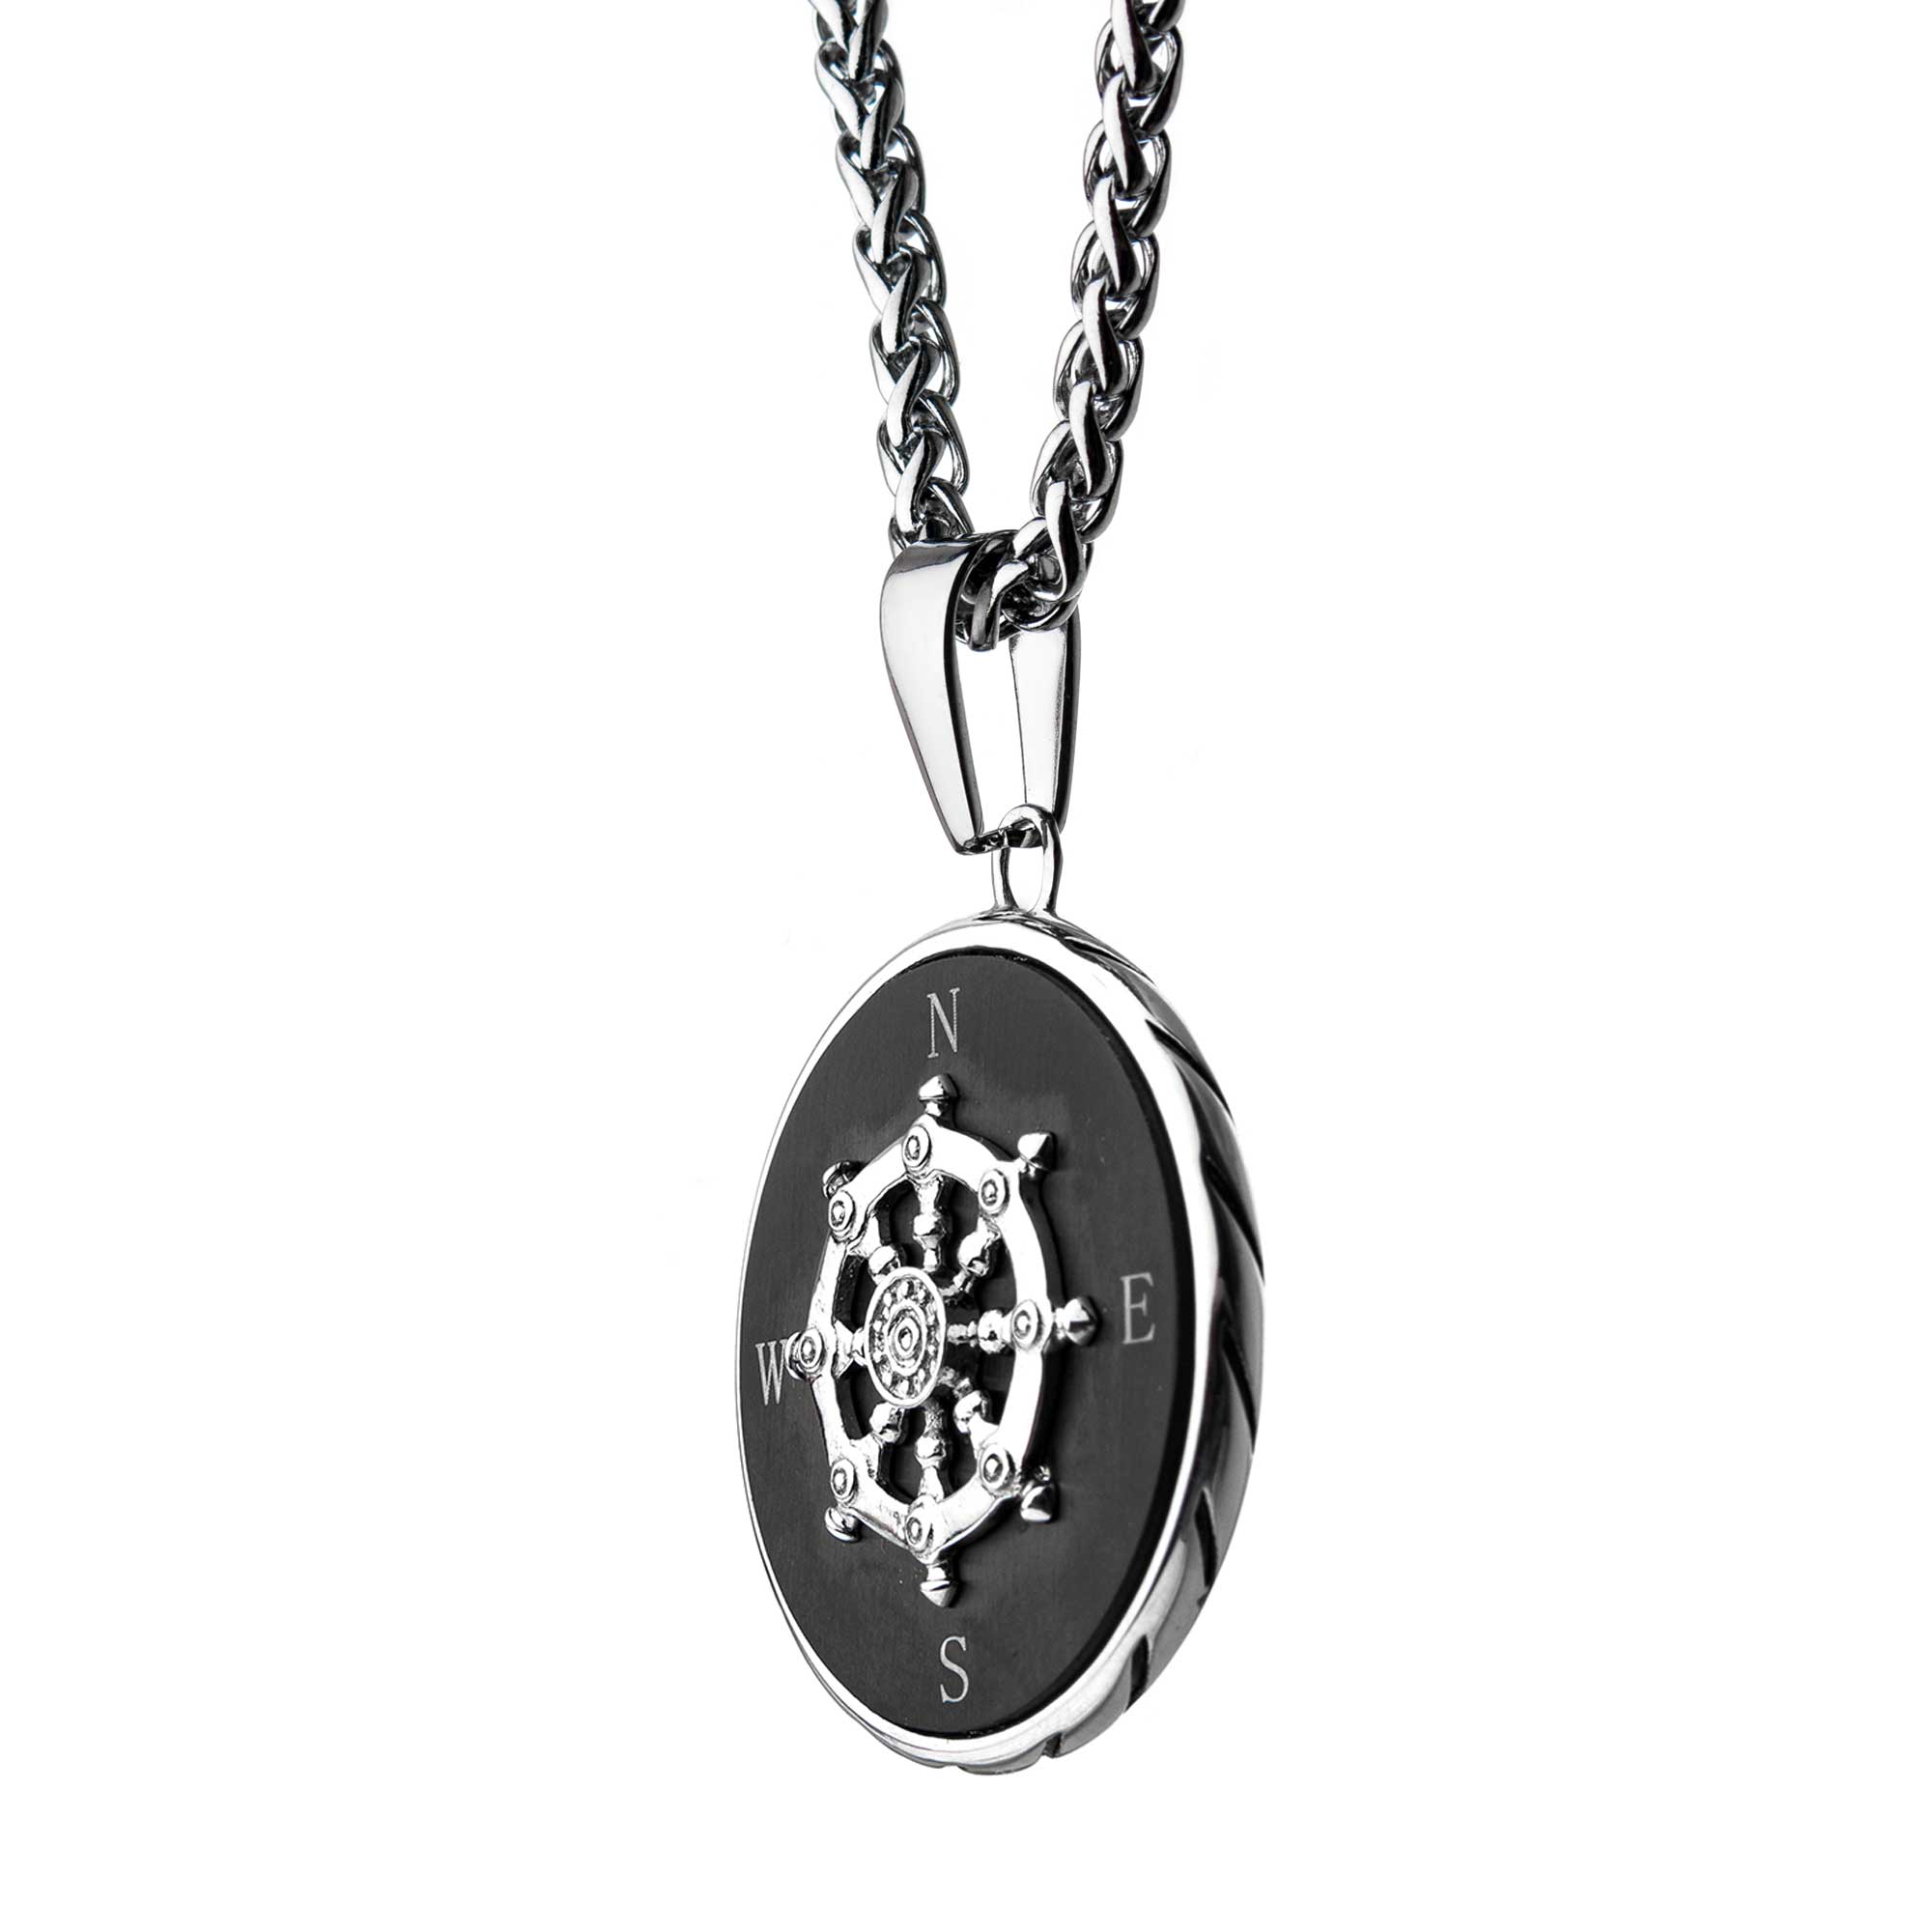 Stainless Steel Black Plated Ship's Wheel Compass Pendant with Chain Image 3 K. Martin Jeweler Dodge City, KS